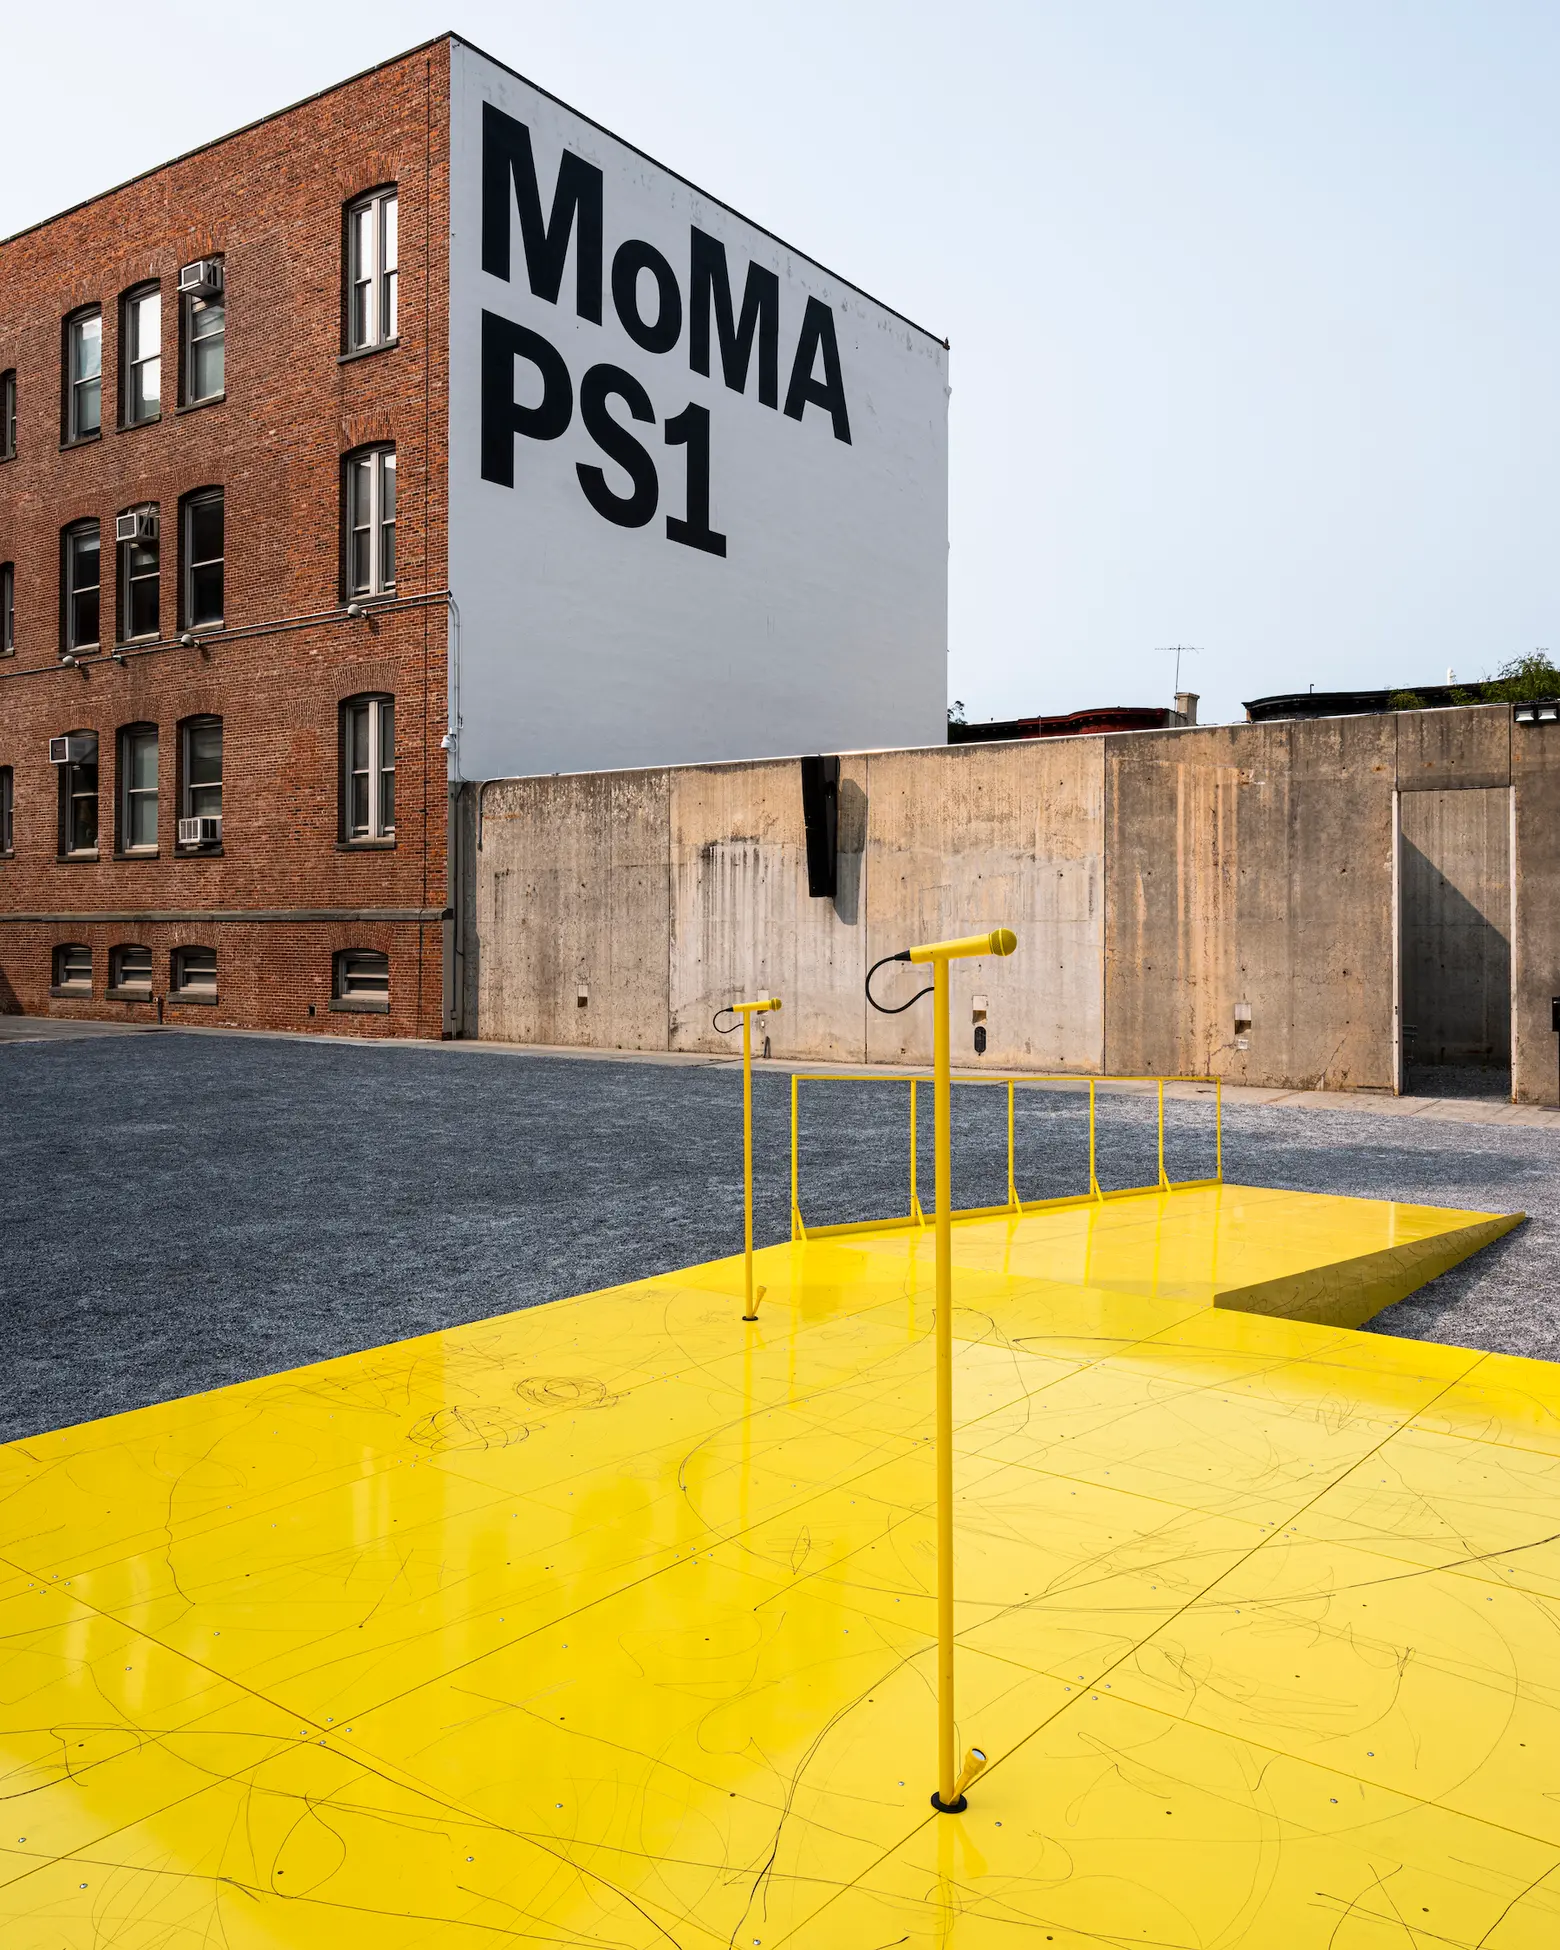 About - MoMA PS1